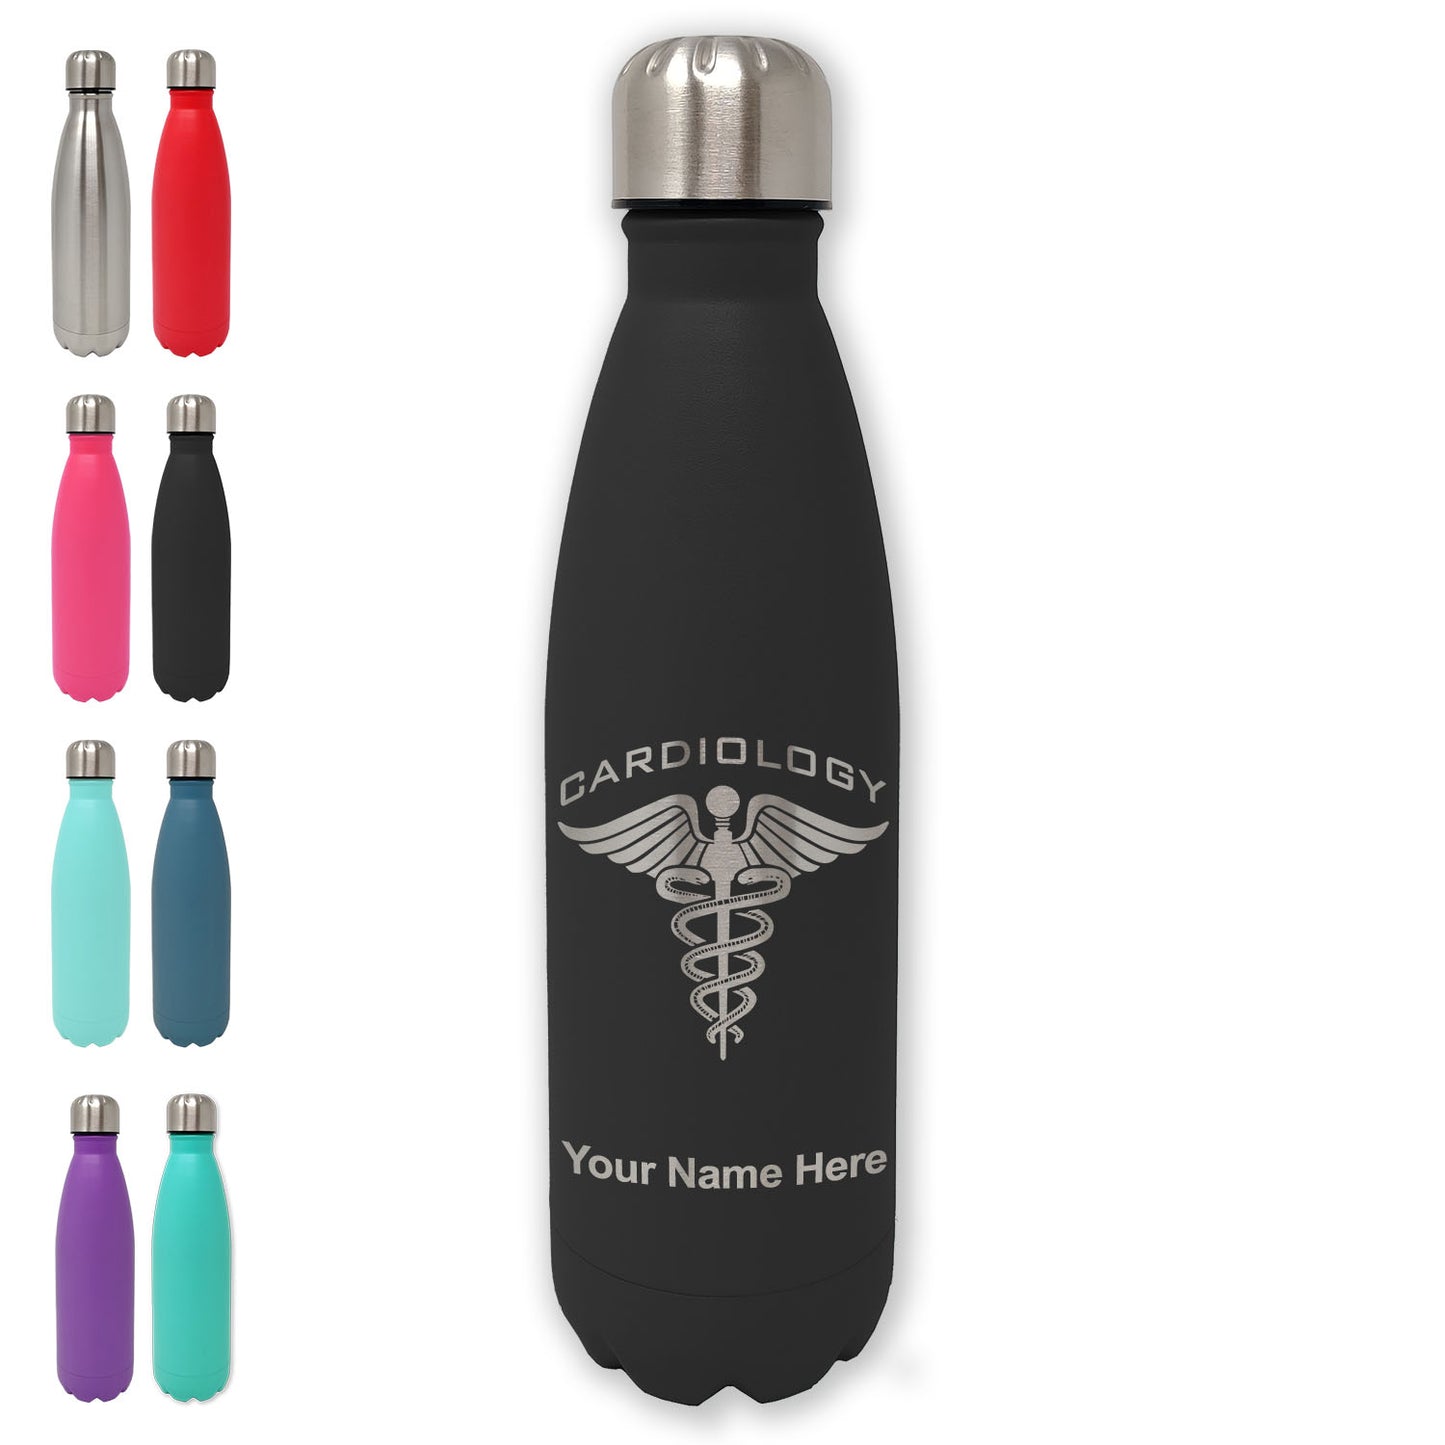 LaserGram Double Wall Water Bottle, Cardiology, Personalized Engraving Included